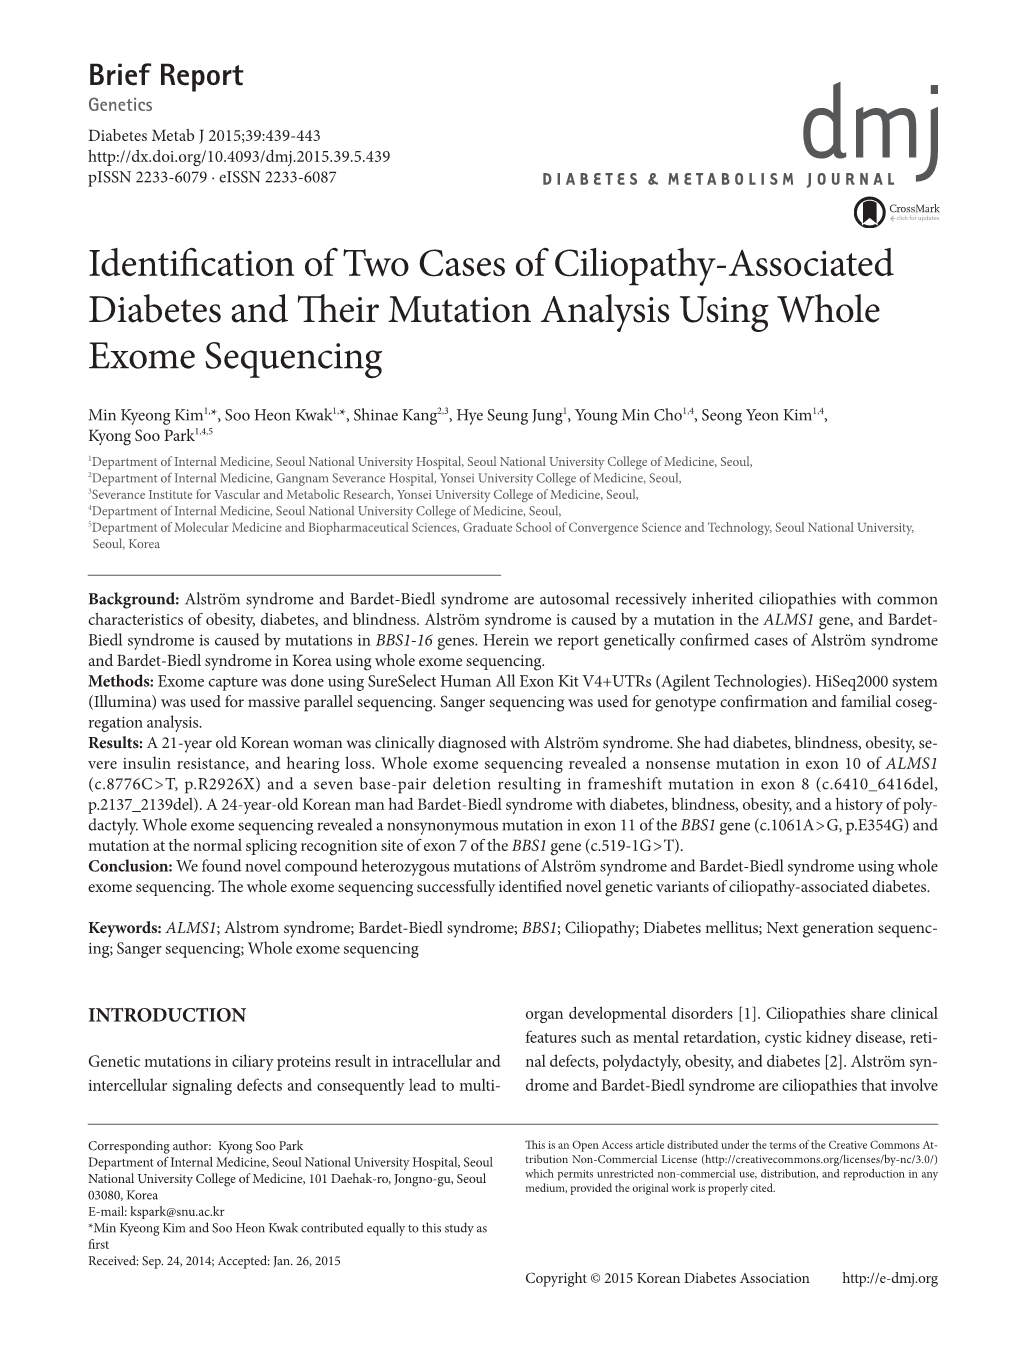 Identification of Two Cases of Ciliopathy-Associated Diabetes and Their Mutation Analysis Using Whole Exome Sequencing